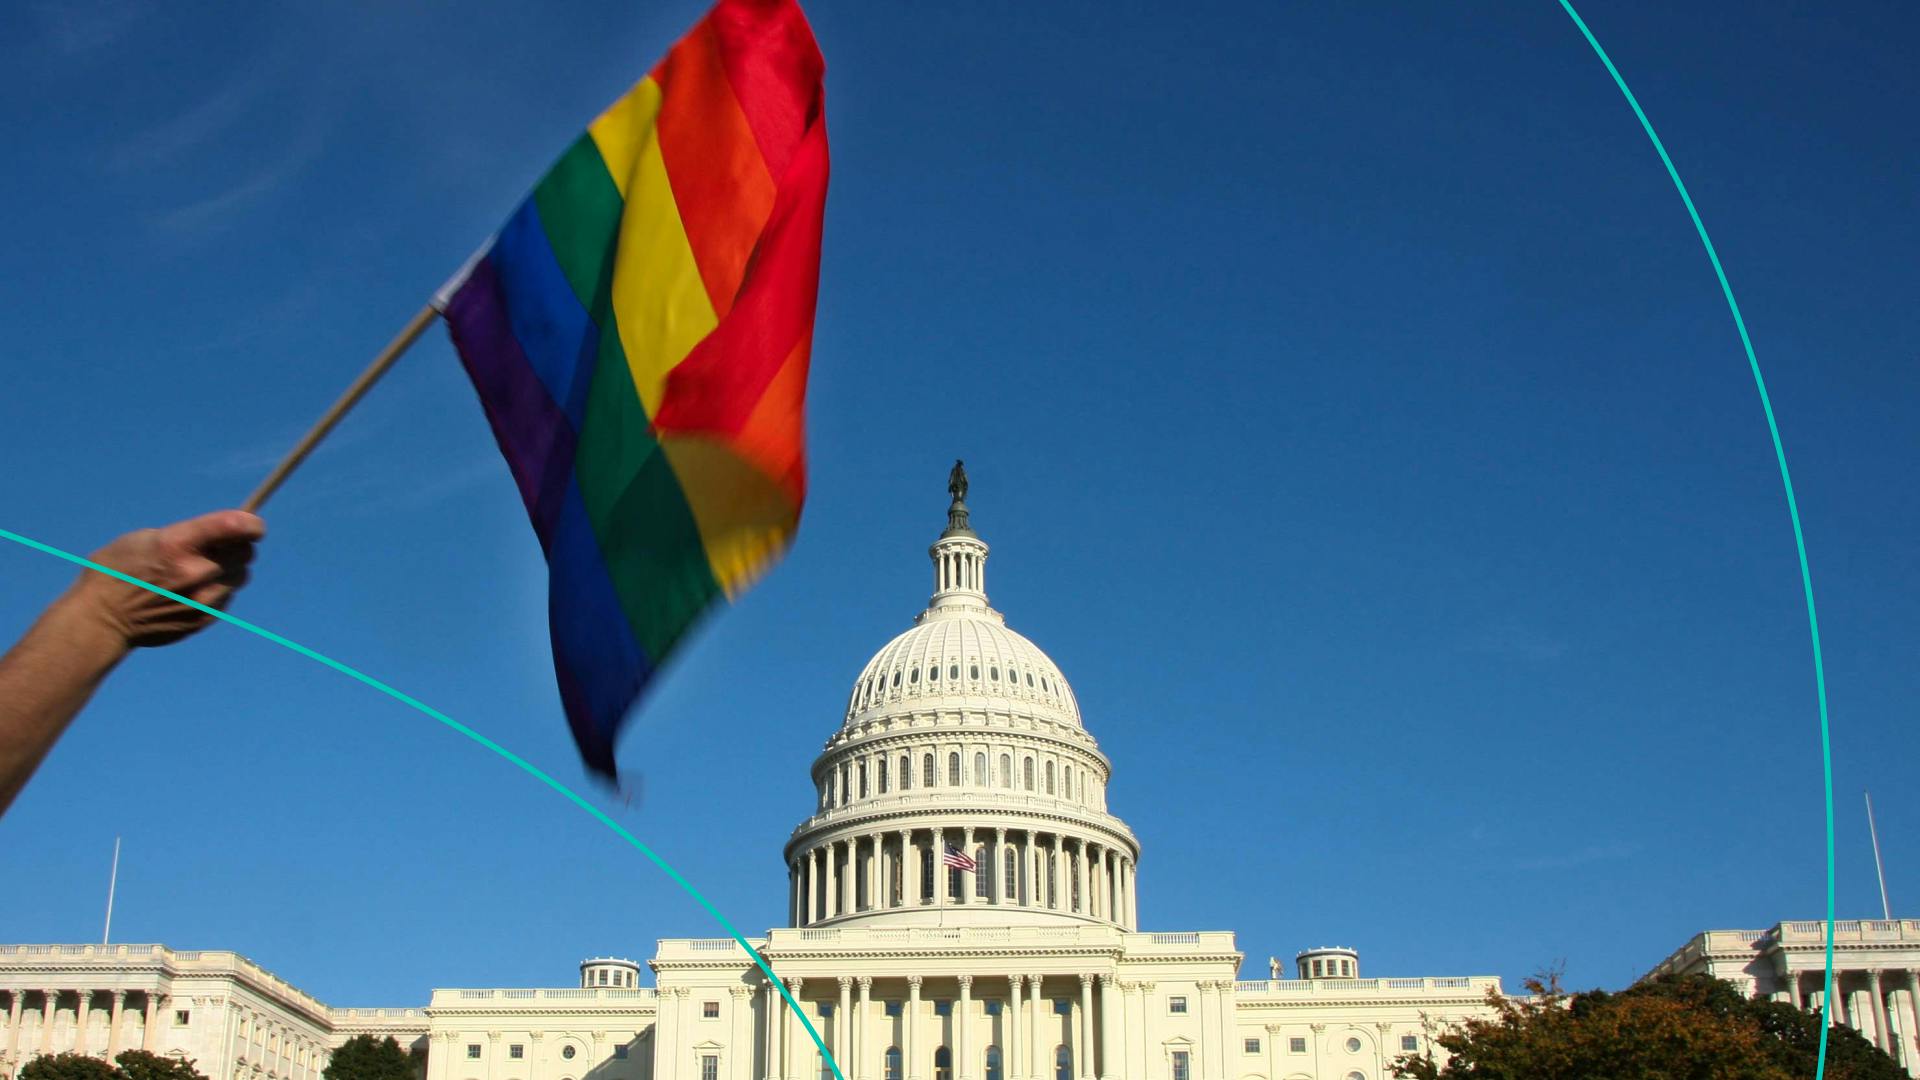 The Pride flag in front of the capitol building